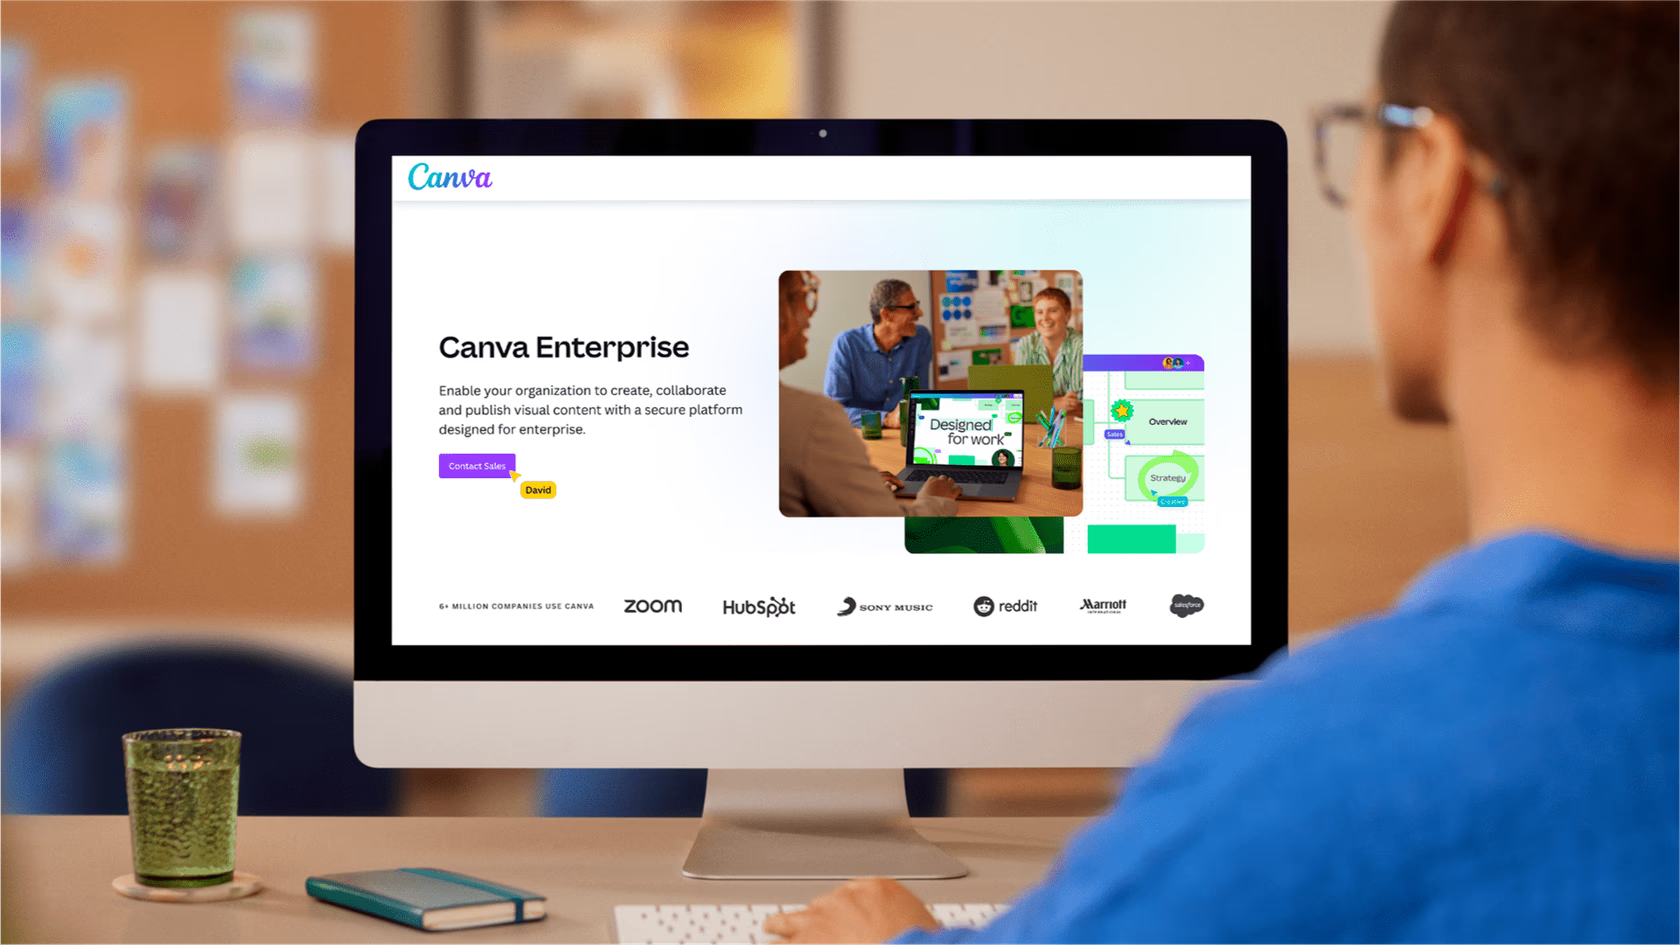 Canva Launches New Enterprise Product for Large Organizations